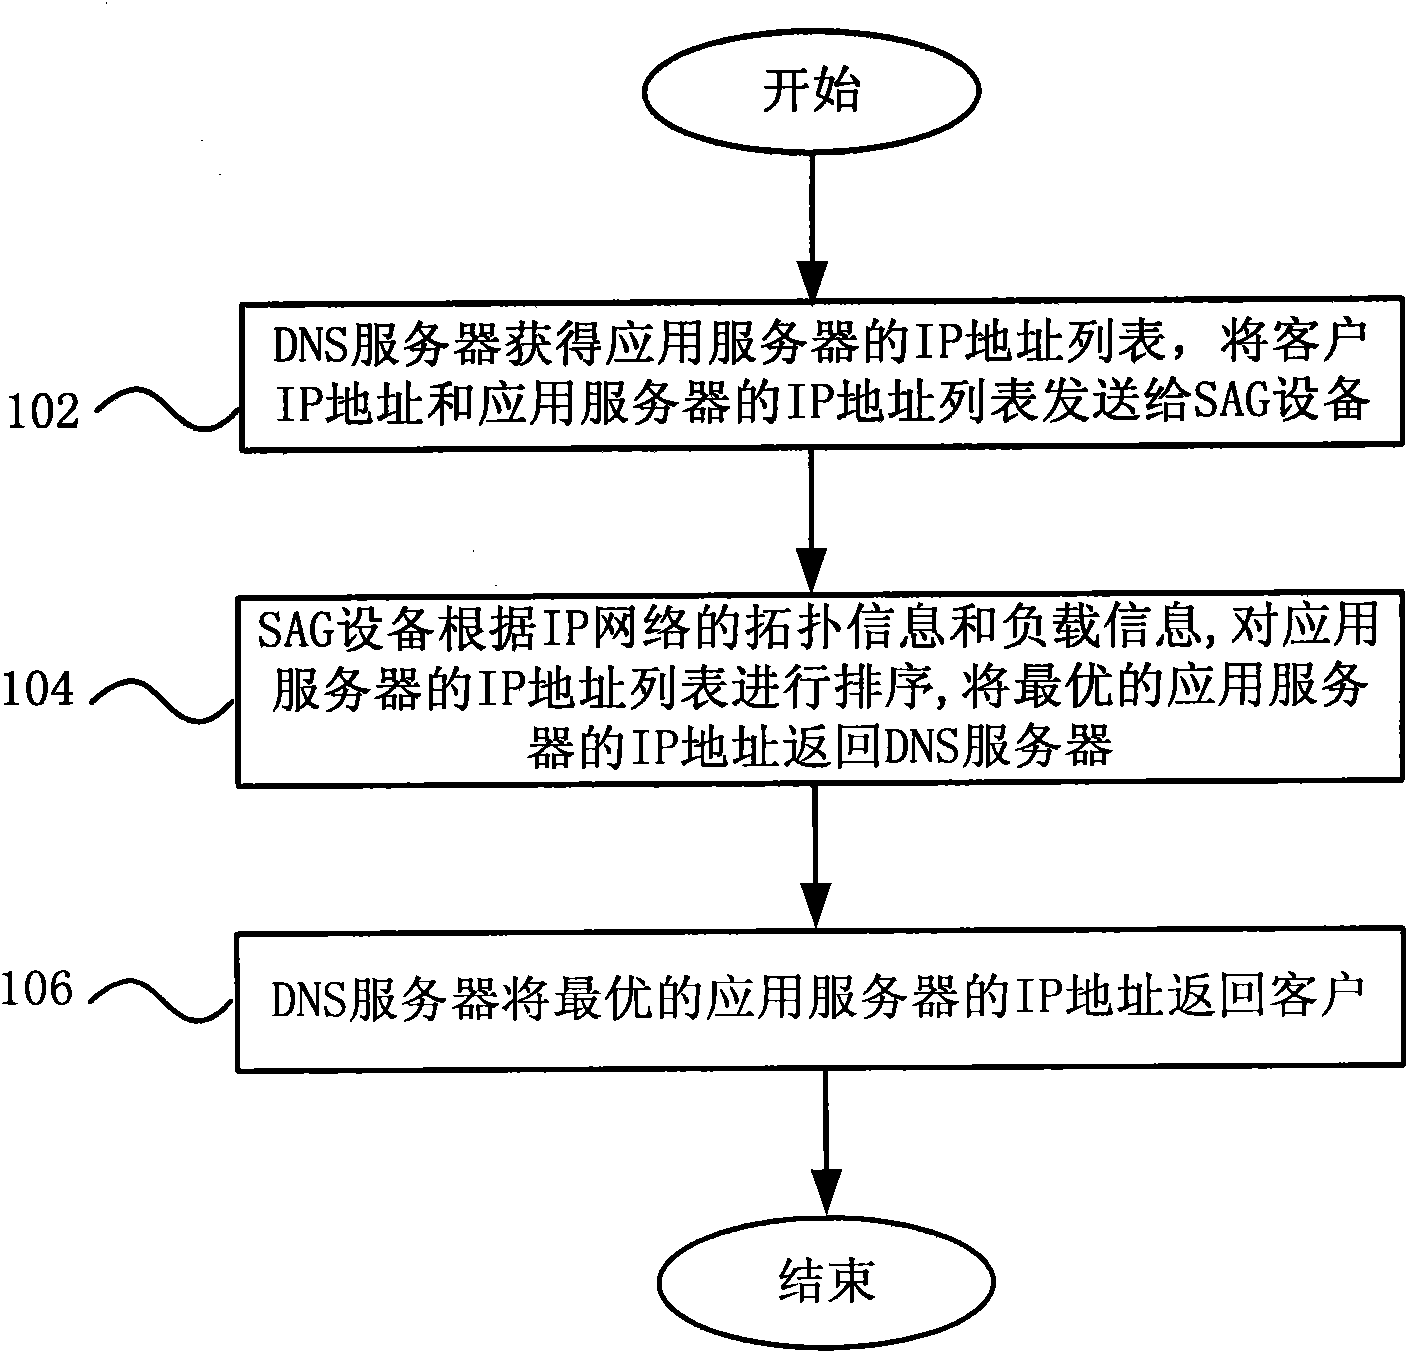 Method, system and SAG (service access gateway) equipment for analyzing DNS (domain name system)